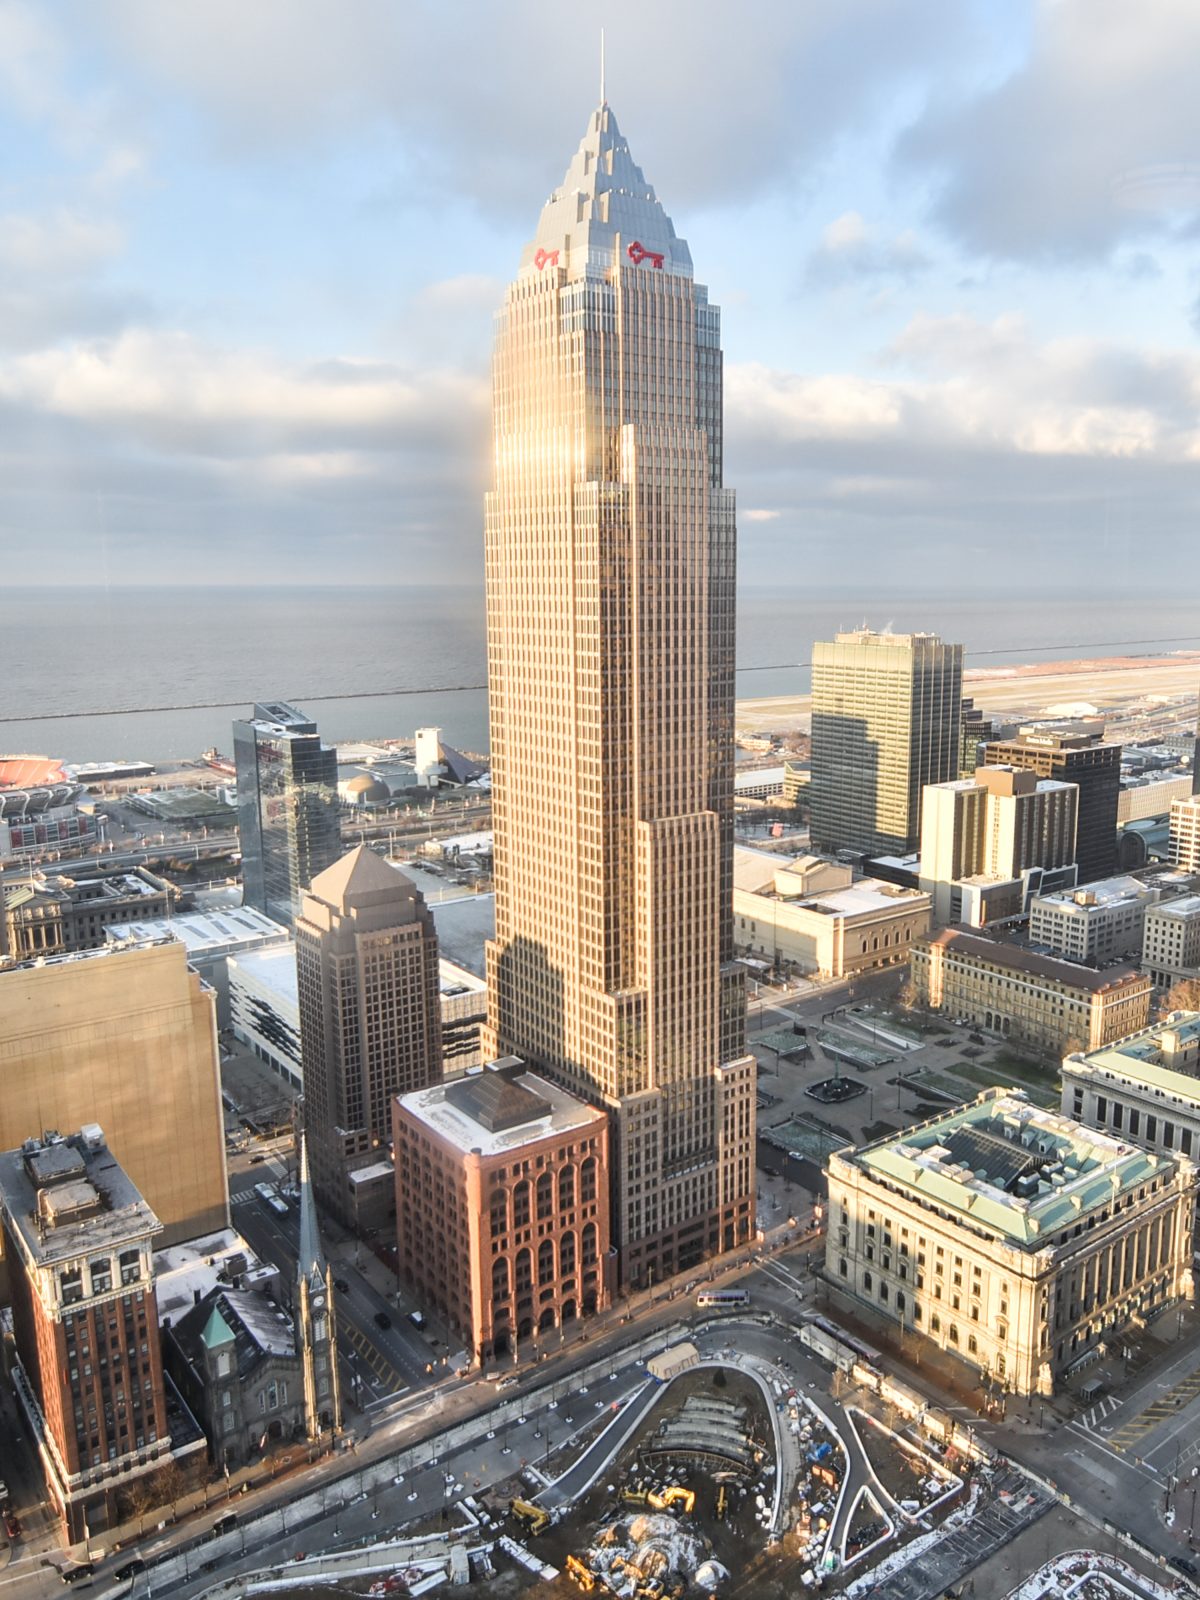 Bird’s eye view shot of Cleveland’s CBD with the Terminal Tower as the centre of attraction